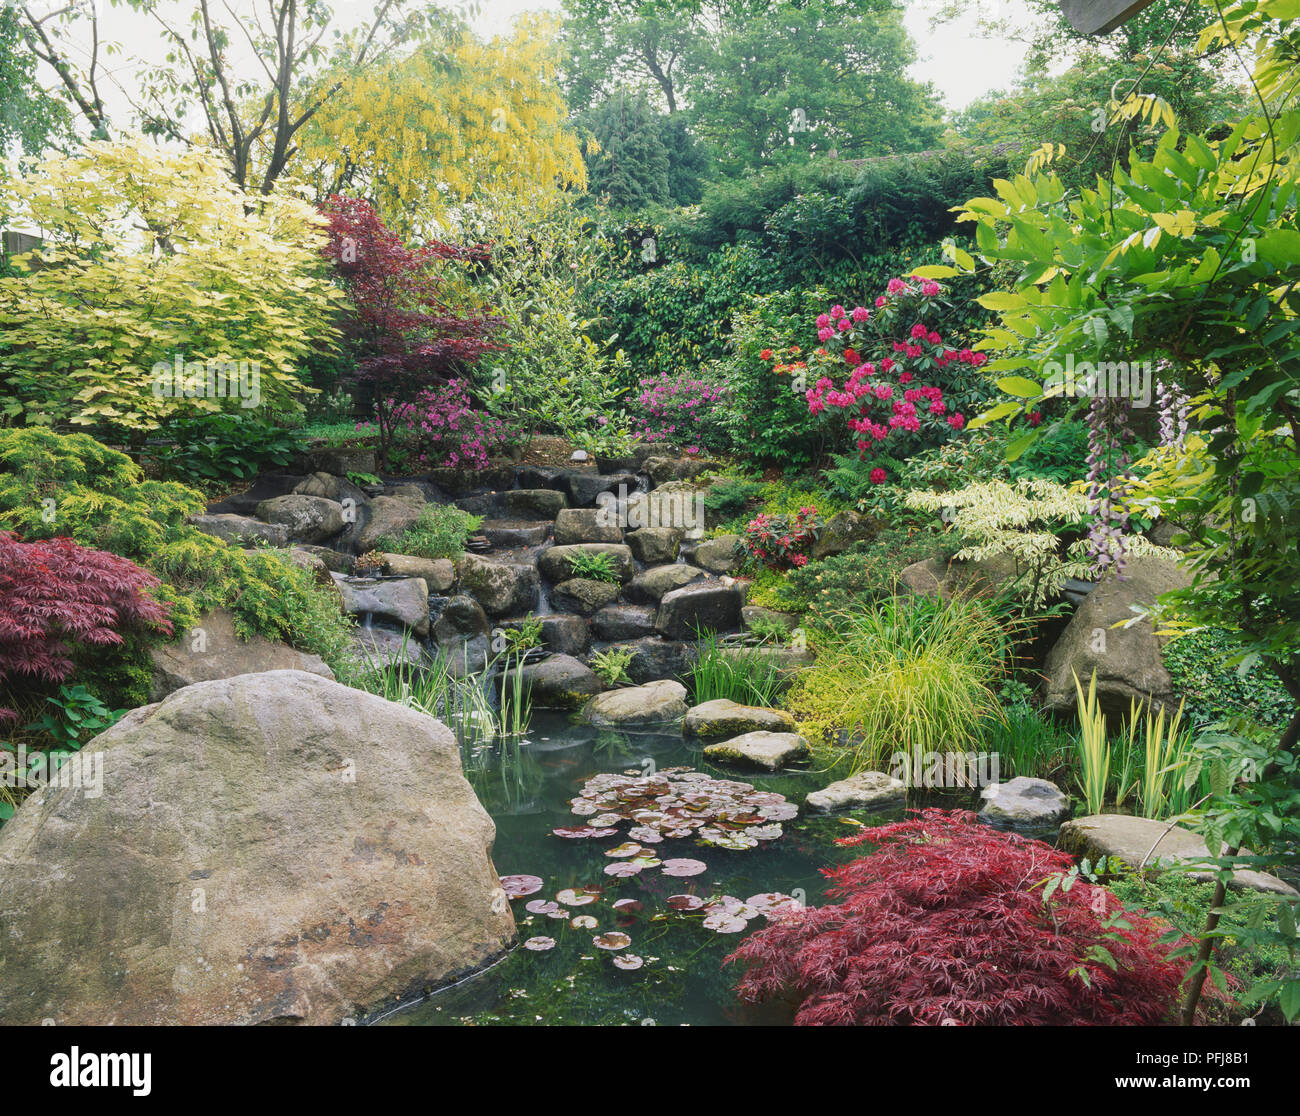 Landscaped park pond with Waterlilies and stepping-stone path, surrounded by tiered rocks, bushes and shrubs. Stock Photo